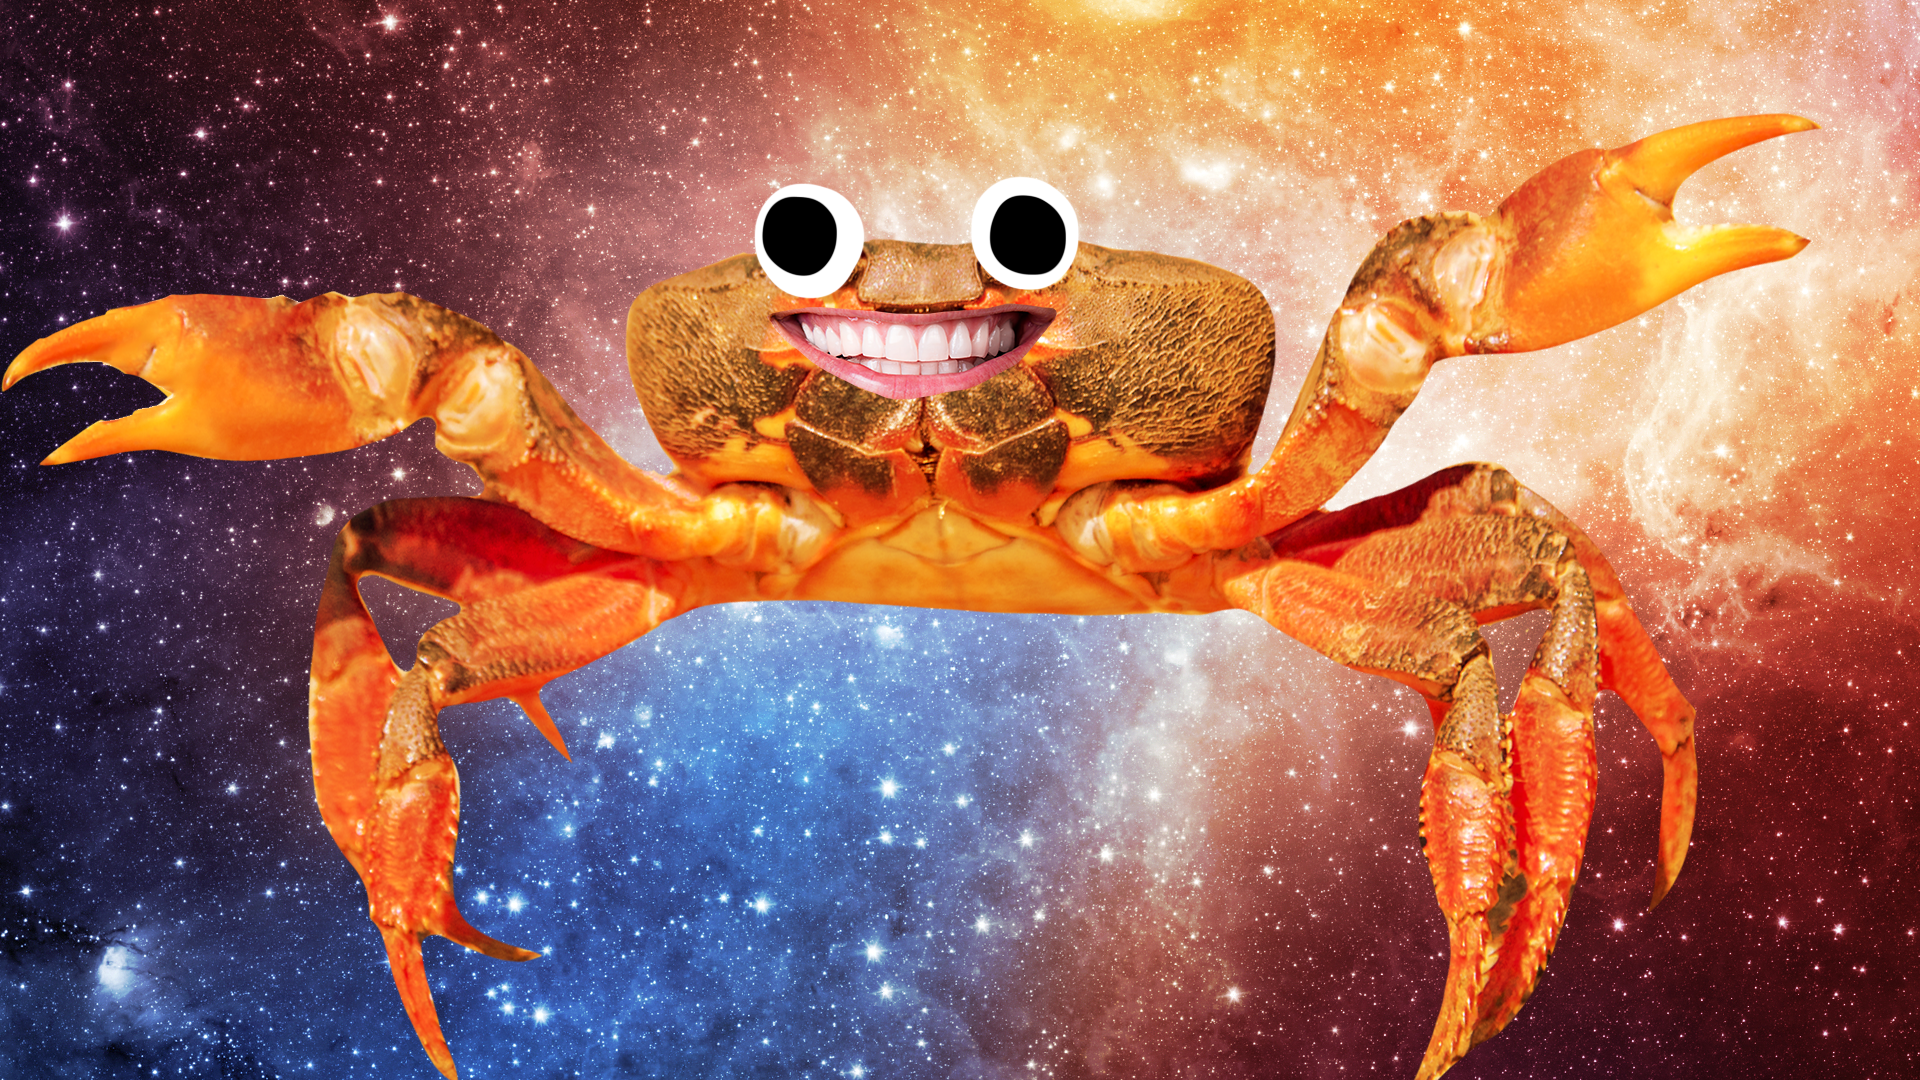 Goofy crab on starry background